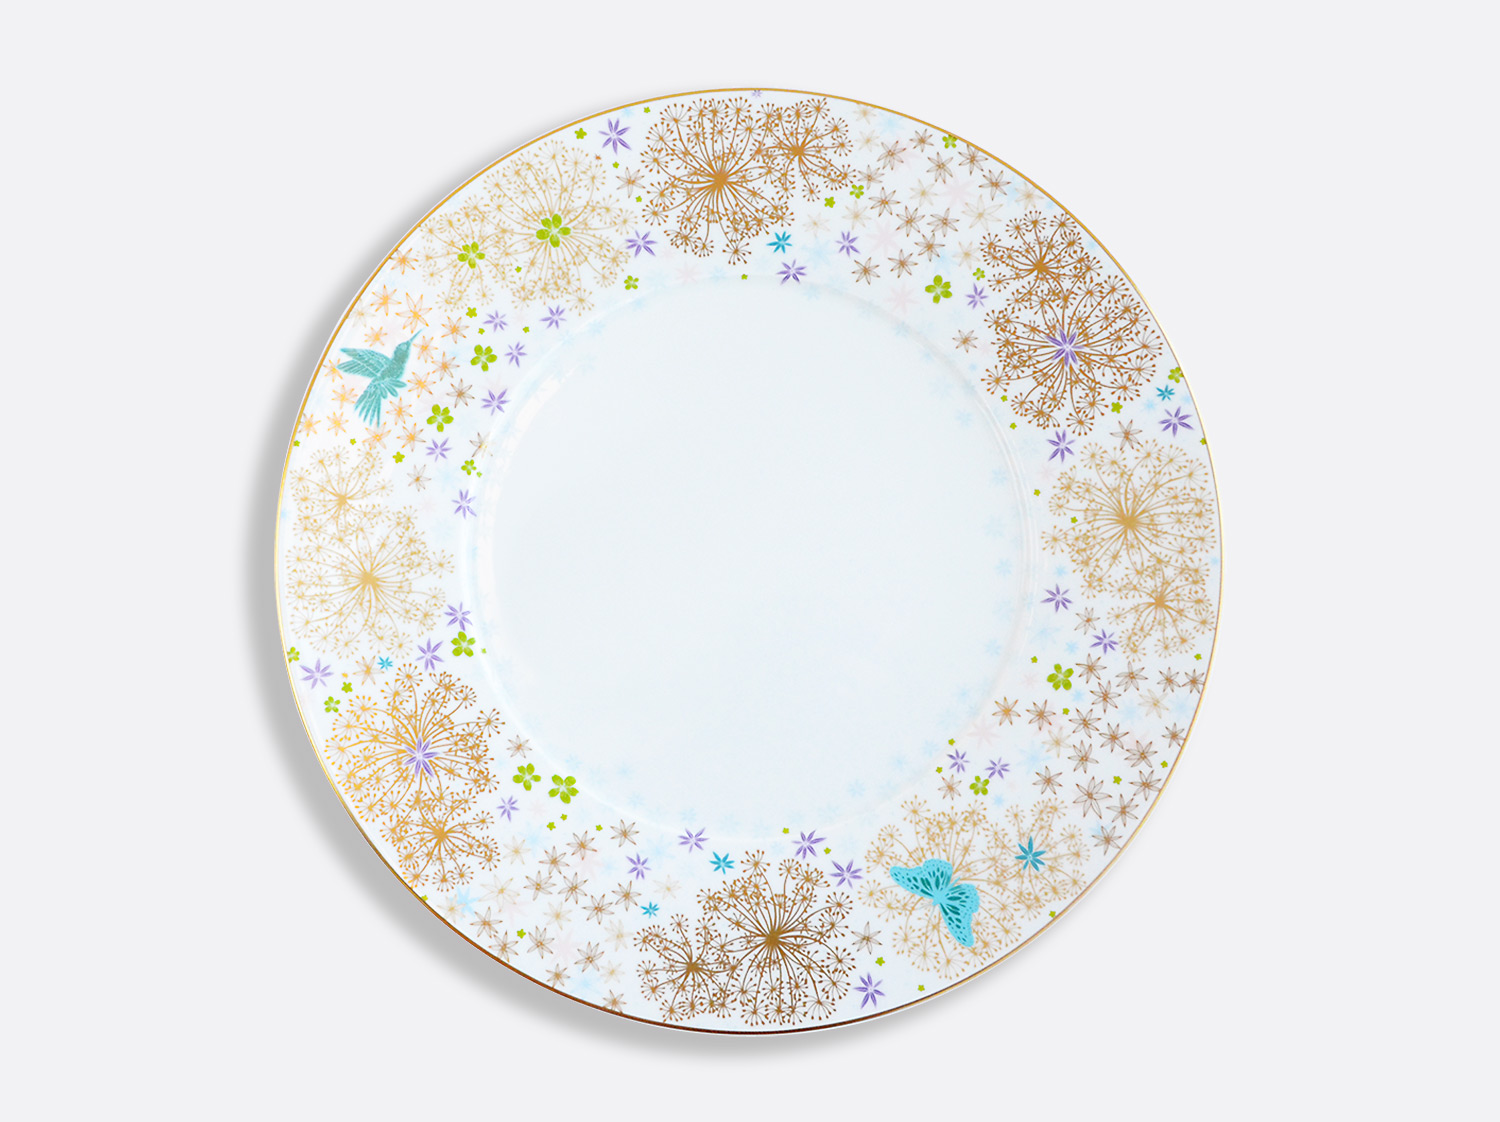 China Service plate 12.2" of the collection FÉERIE - MICHAËL CAILLOUX | Bernardaud